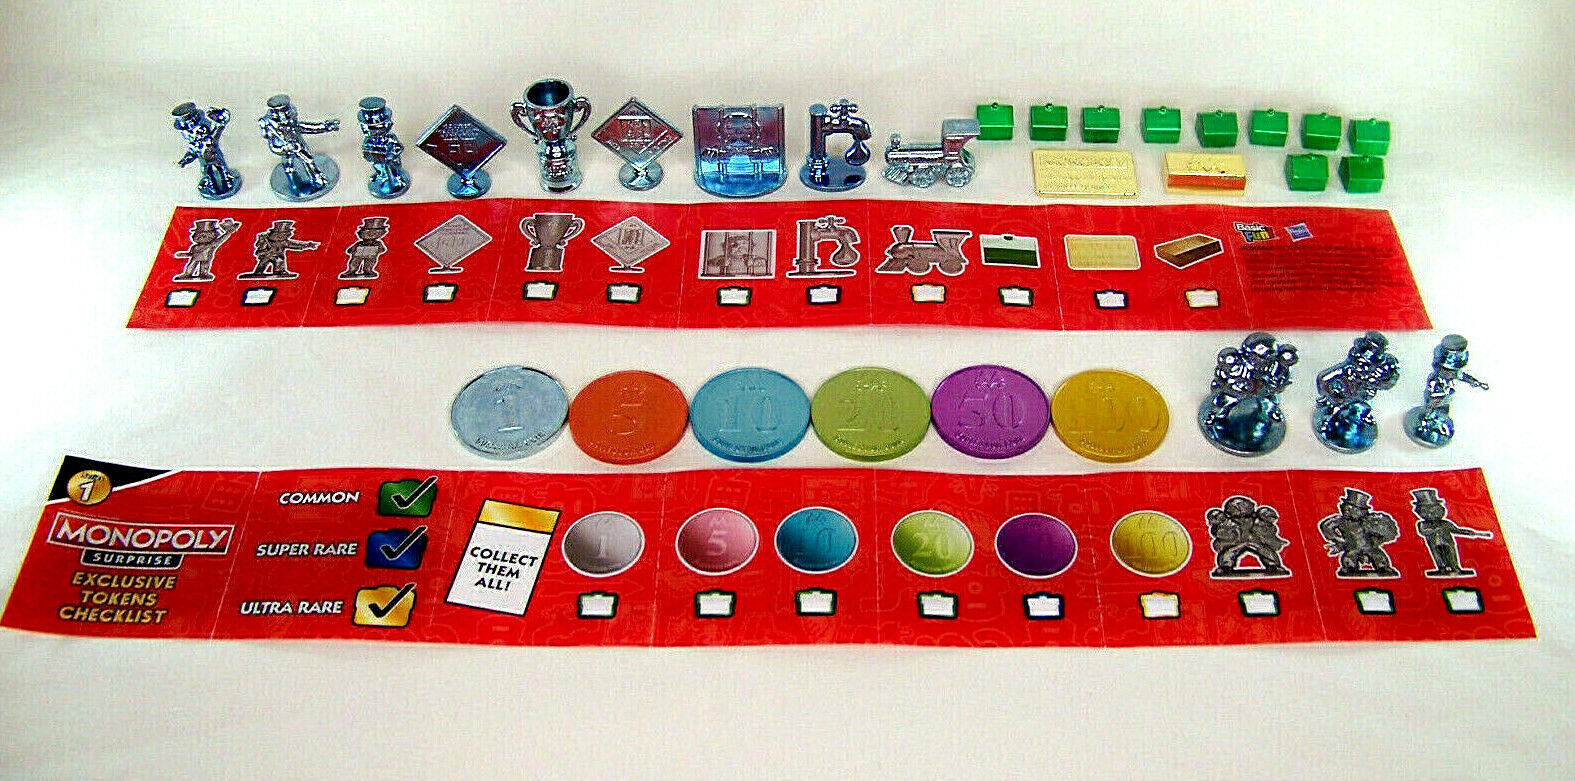 Monopoly Surprise Exclusive Collectible Collectors Tokens Complete Set Series 1 Hasbro 00431